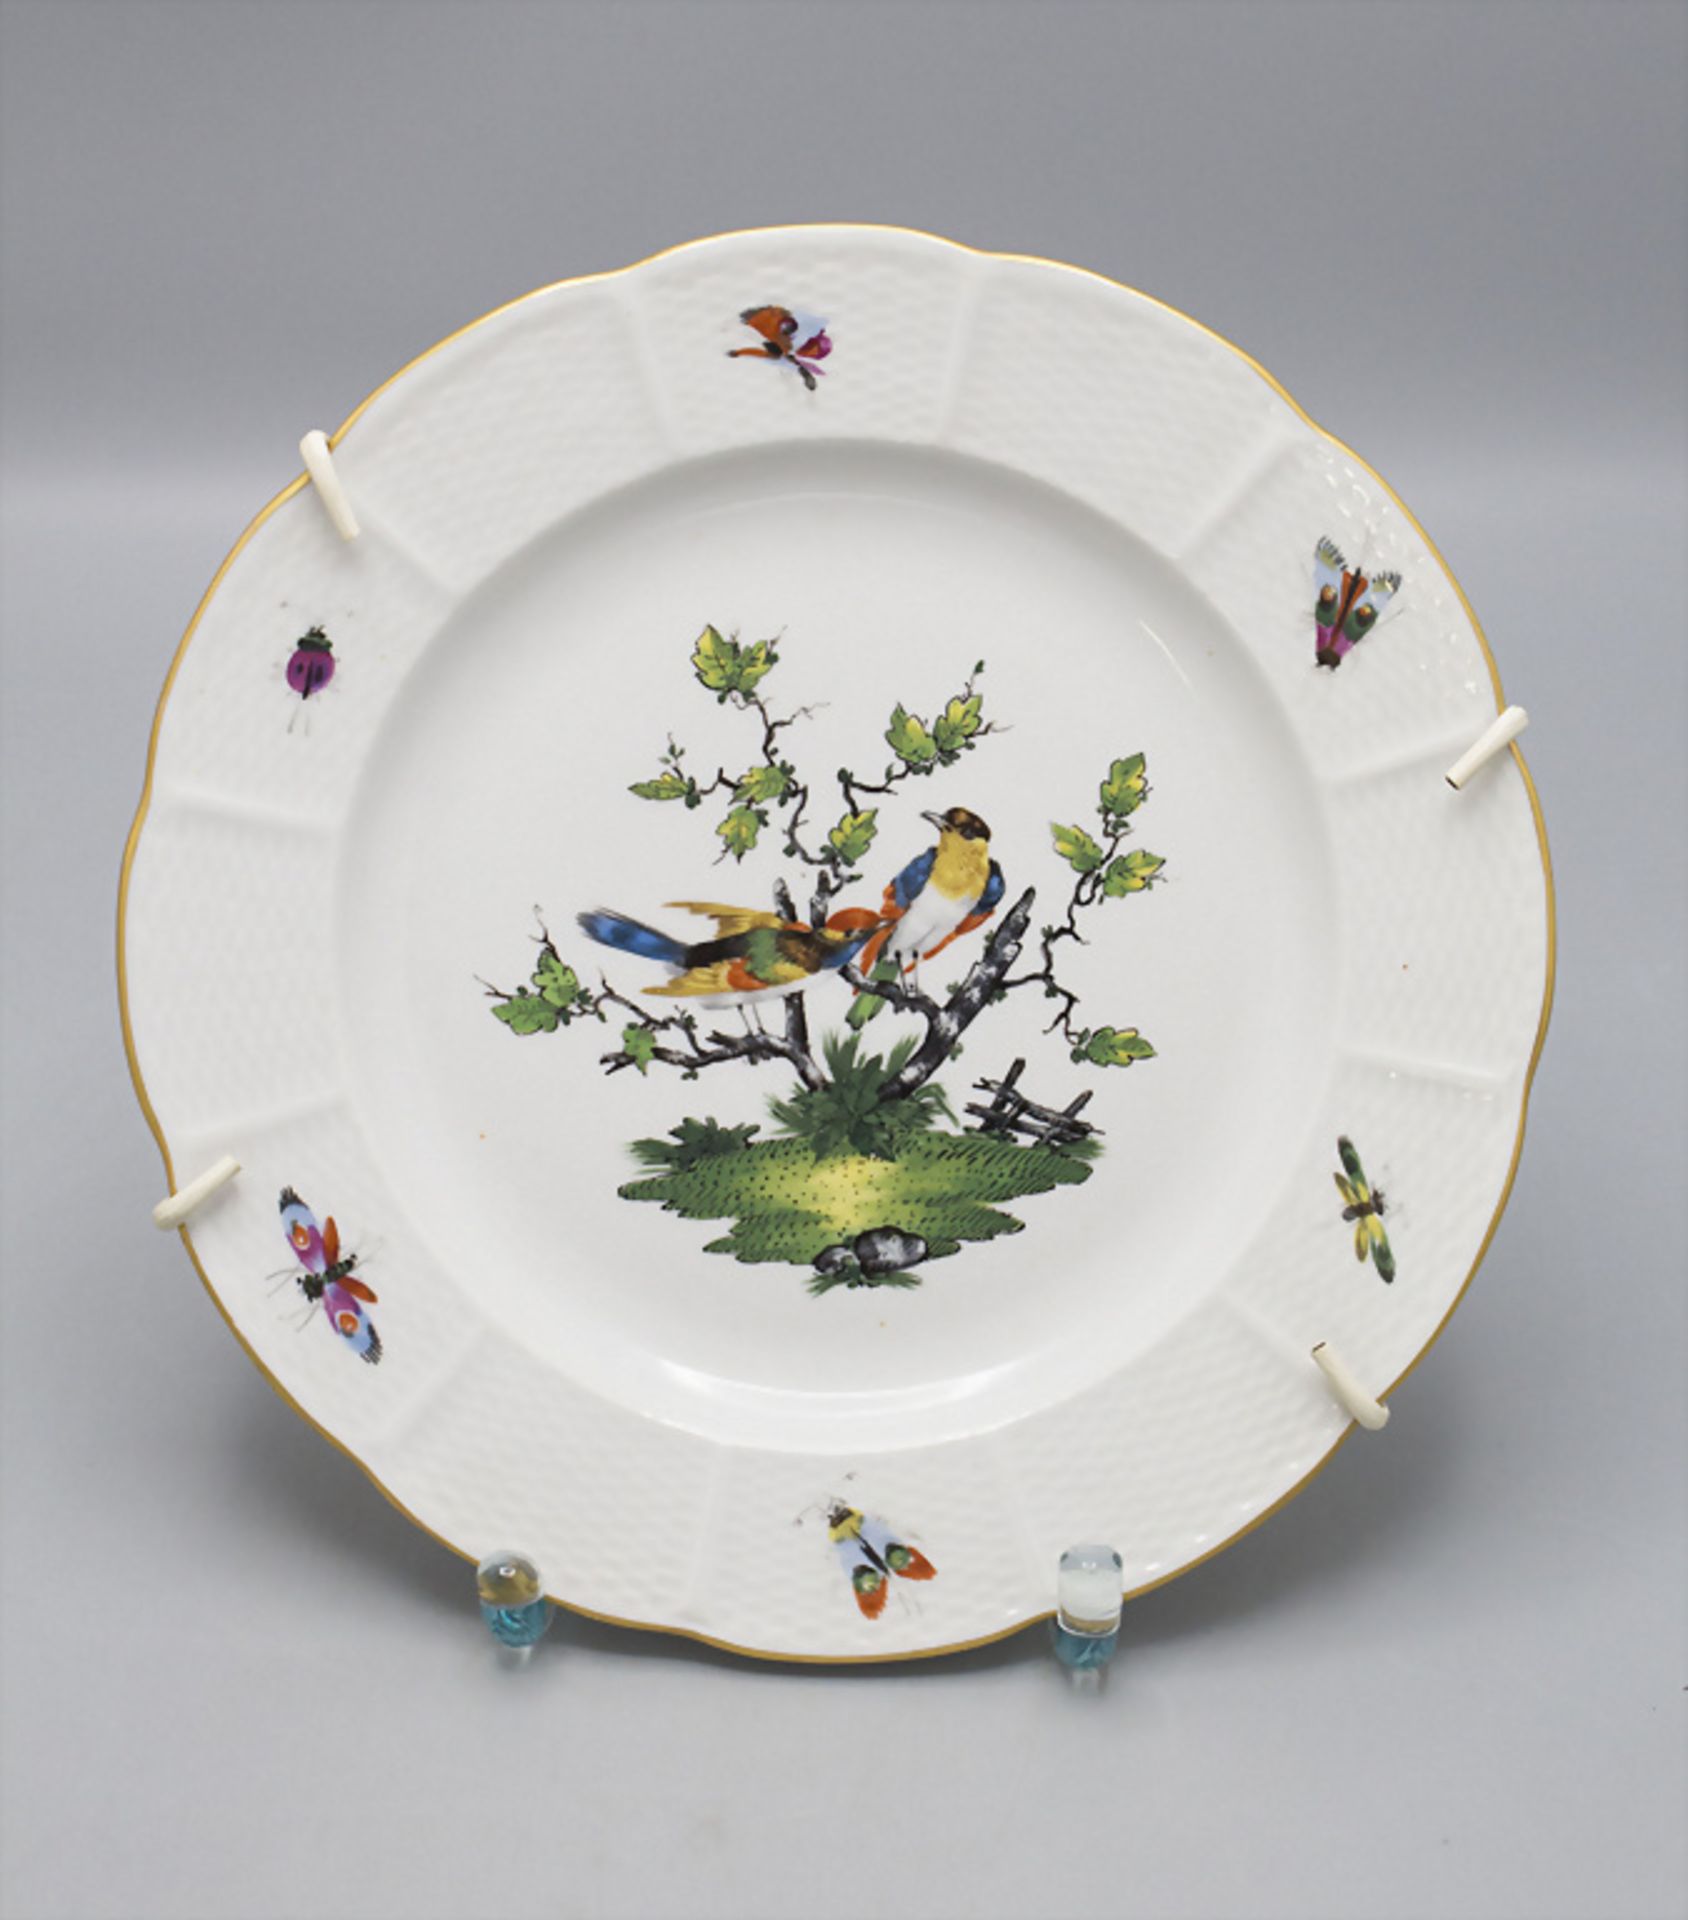 Teller mit Vogel- und Insektenmalerei / A plate with birds and insect paintings, Ludwigsburg, ...